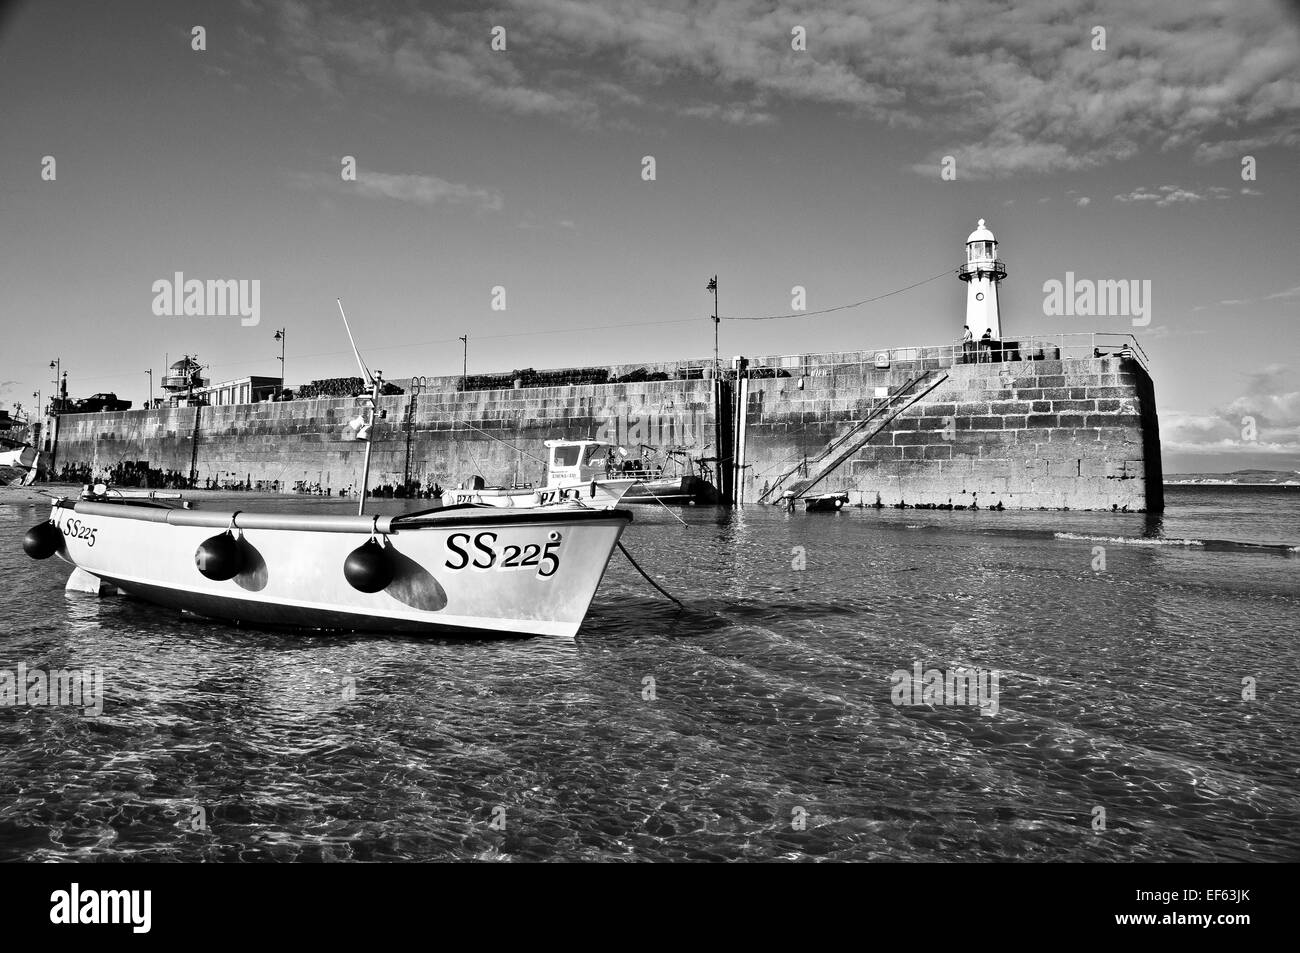 The SS225 rests peacefully in the shallow, crystal clear waters of the St. Ives harbour with the lighthouse watching on. Stock Photo